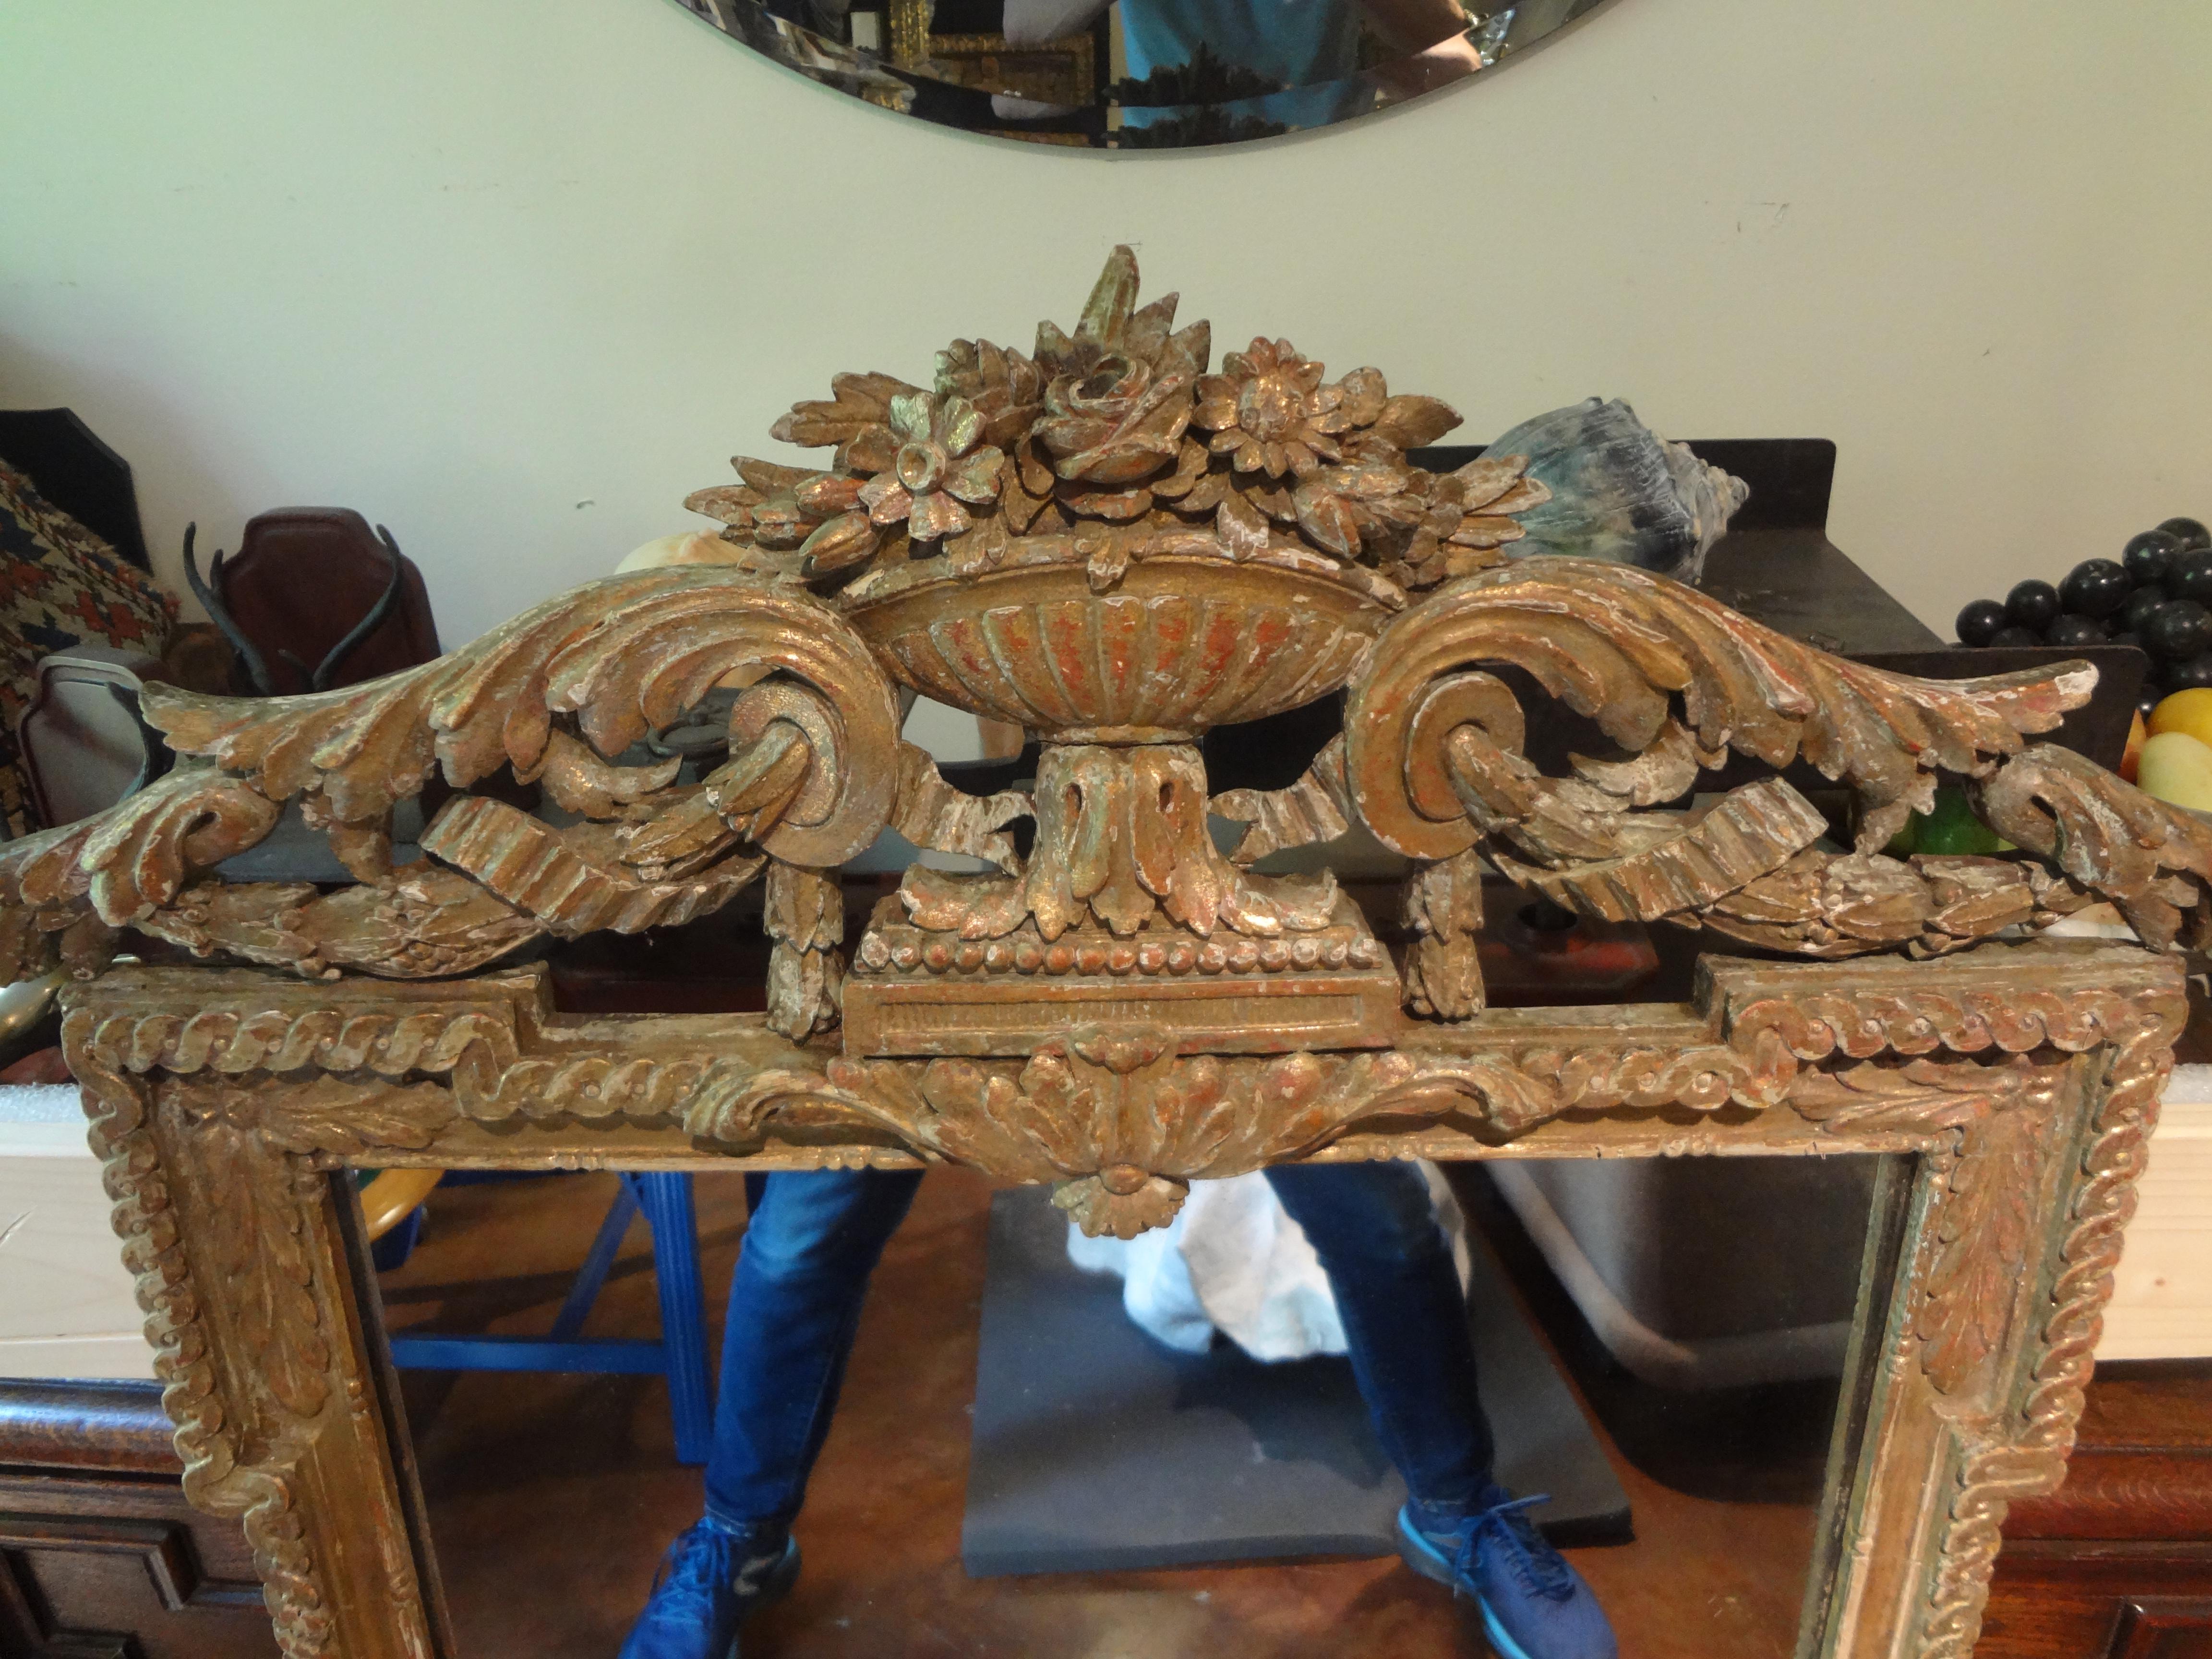 18th Century French Régence Giltwood Mirror.
Our 18th century French Regence gilt wood mirror is absolutely stunning.
Perfect for above a console table, credenza, commode or in a powder room.
Great patina!
